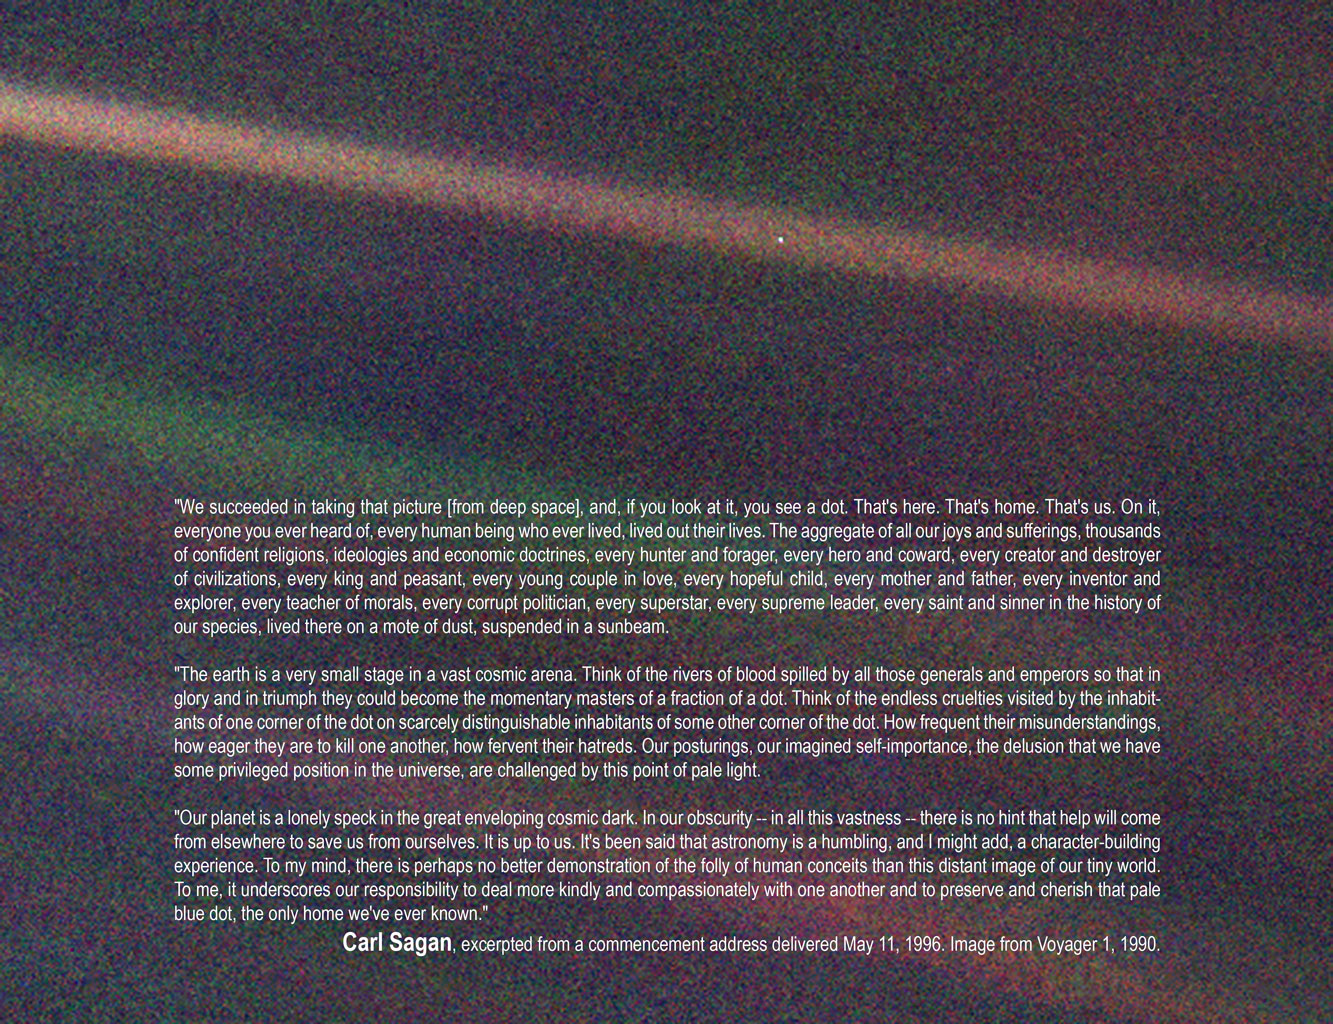 Carl Sagan Quote Preserve and cherish the pale blue dot the only home  weve ever